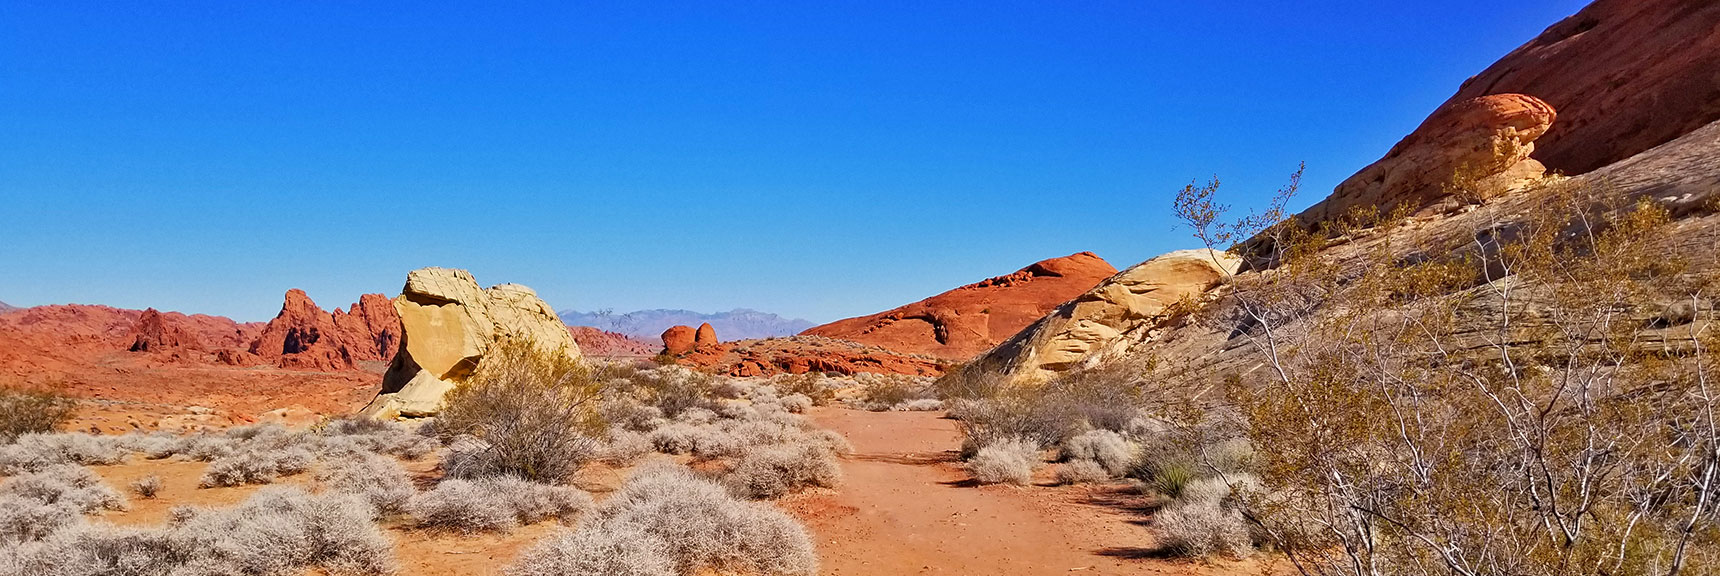 Rounding the Final Corner on White Domes Loop Trail in Valley of Fire State Park, Nevada